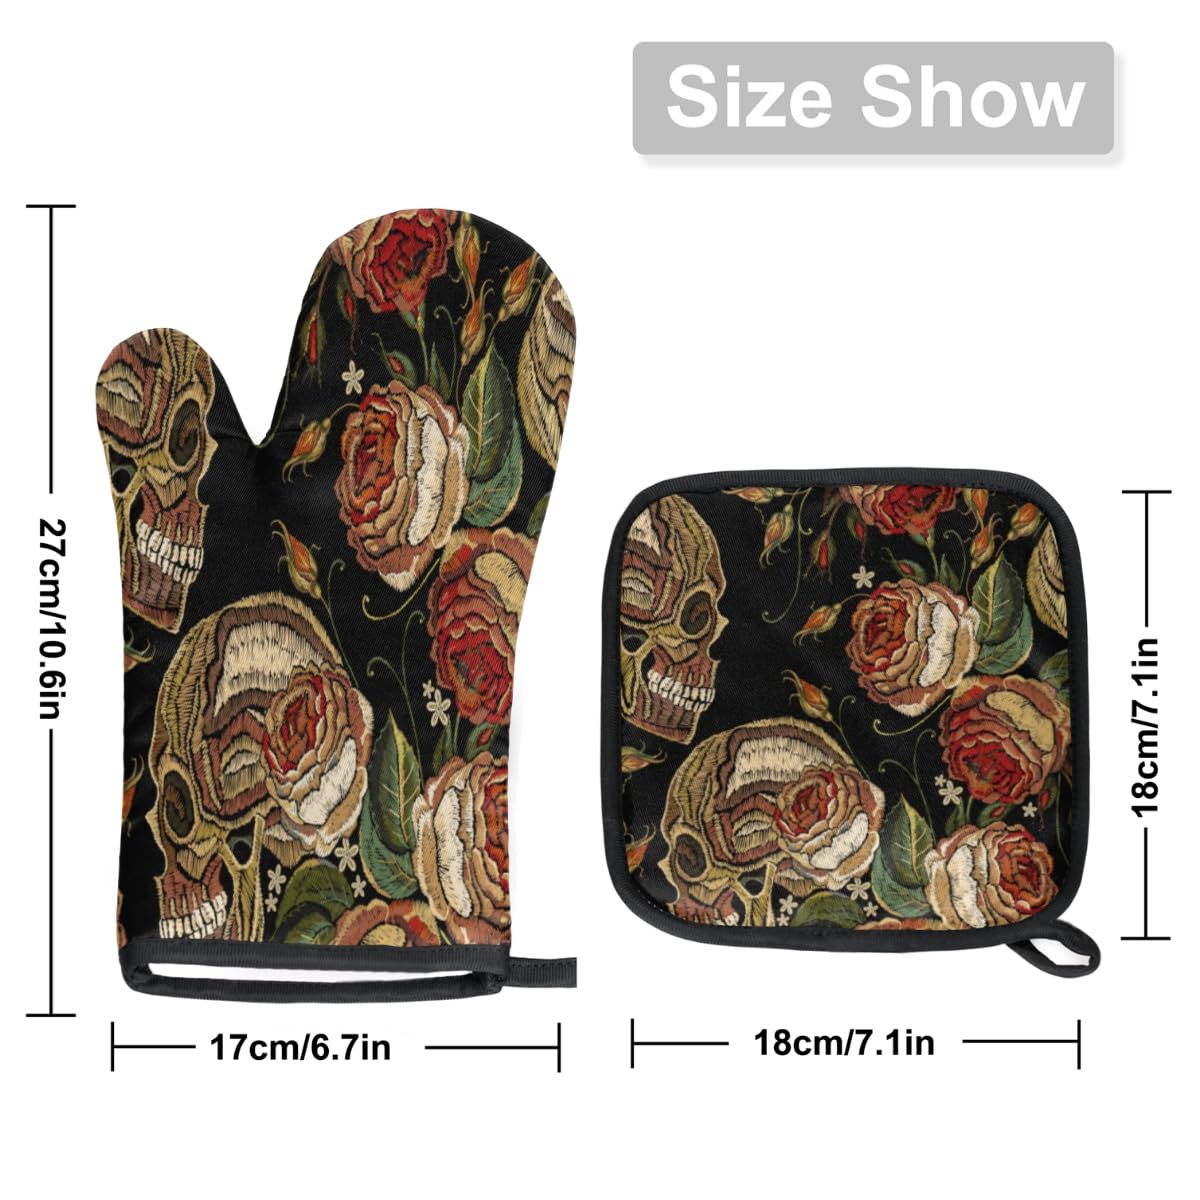 Embroidery Skull Roses Flowers Oven Mitts and Pot Holders Sets of 2 Heat Resistant Non-Slip Kitchen Gloves Hot Pads with Inner Cotton Layer for Cooking BBQ Baking Grilling